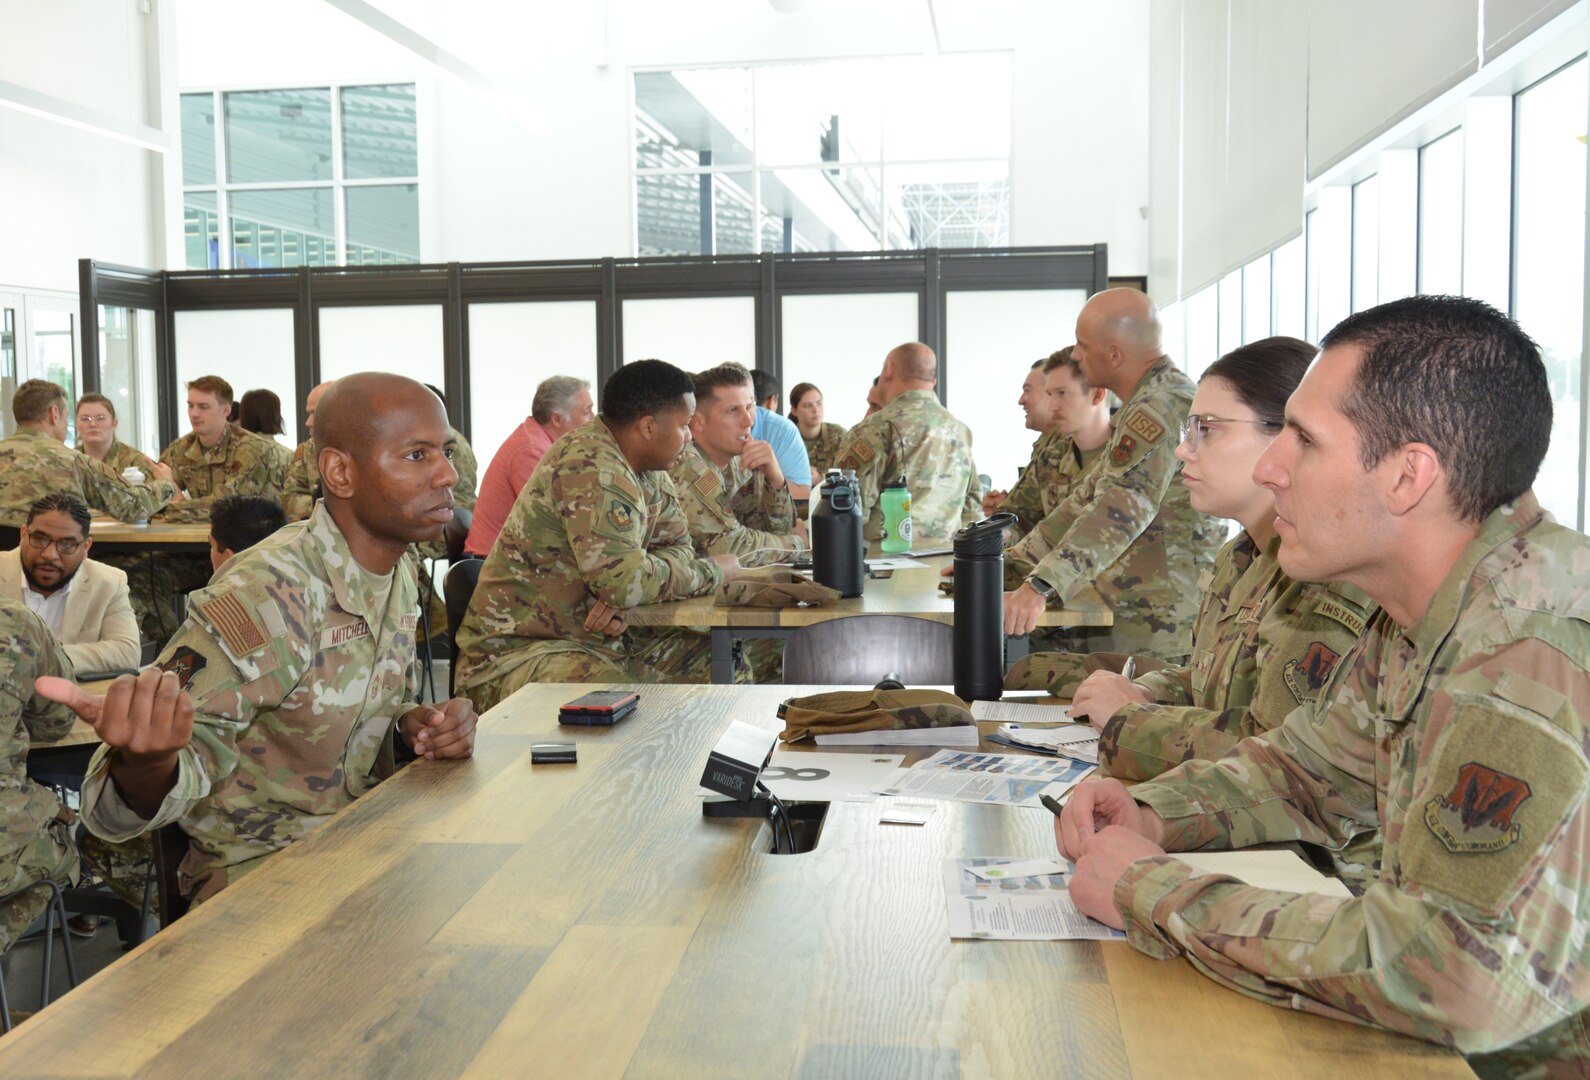 Chief Master Sgt. Brian Mitchell (left), 543rd Intelligence Squadron senior enlisted leader, discusses personal growth with junior Airmen during a speed-mentoring session, Friday, at Joint Base San Antonio-Kelly.